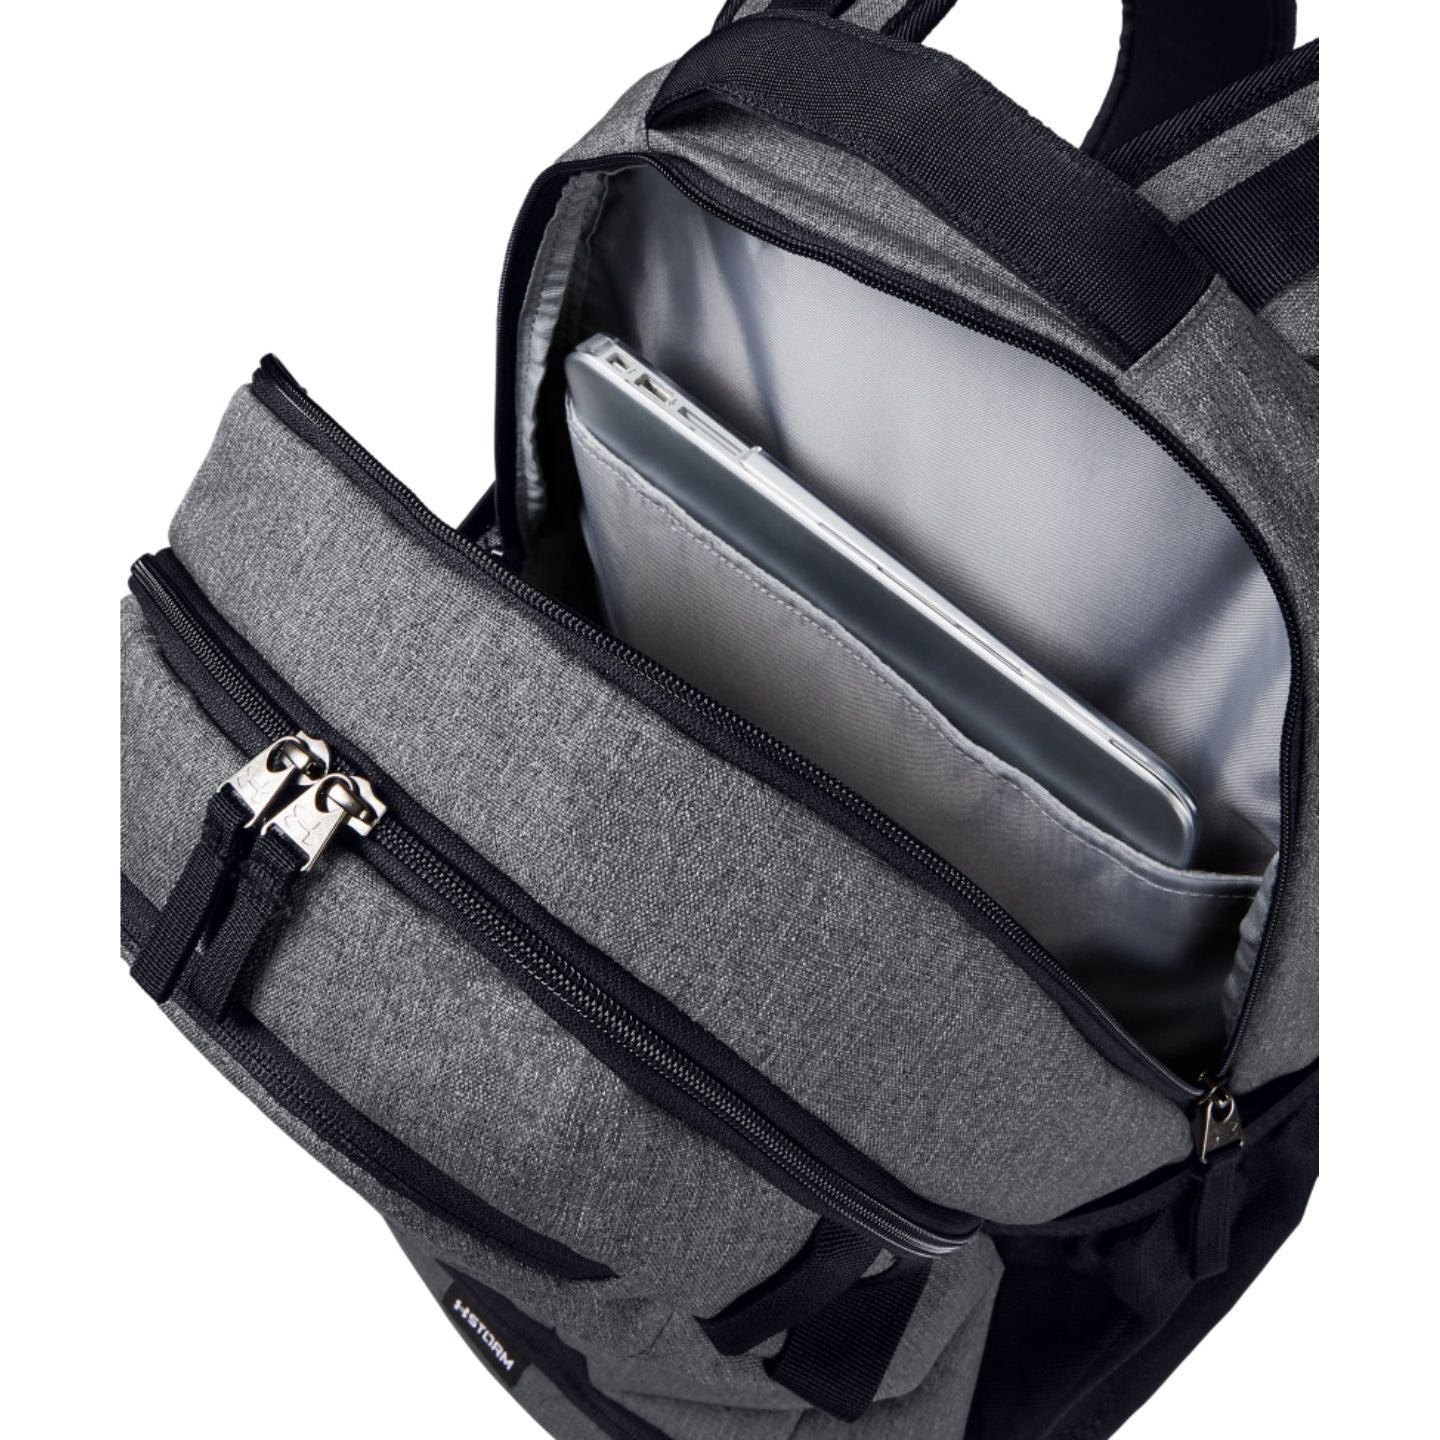 Under Armour Hustle 5.0 Backpack - Graphite